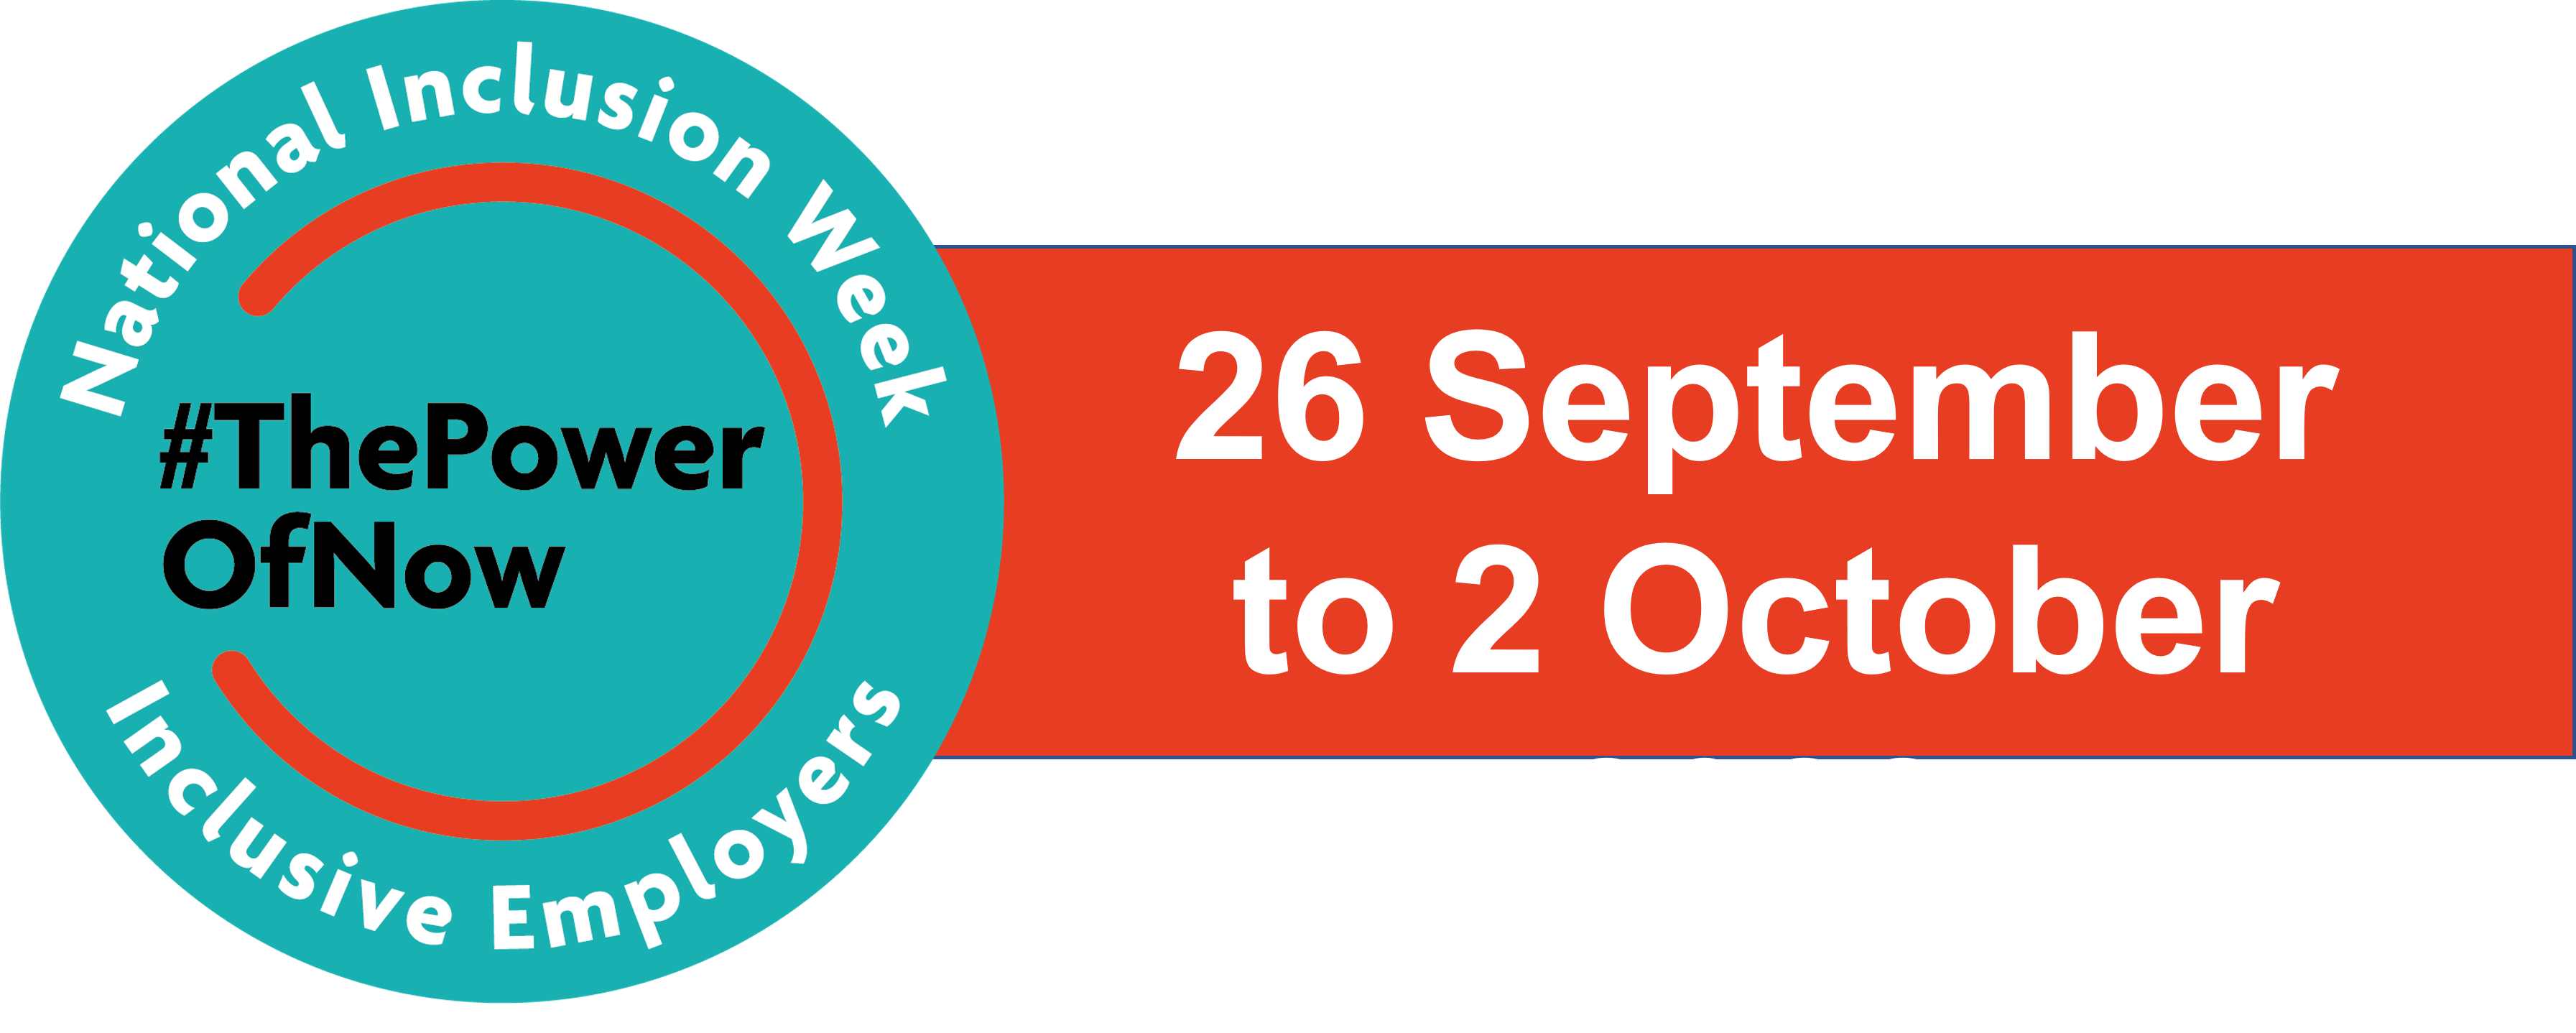 National Inclusion Week logo, #ThePowerIsNow, 26 September to 2 October 2022